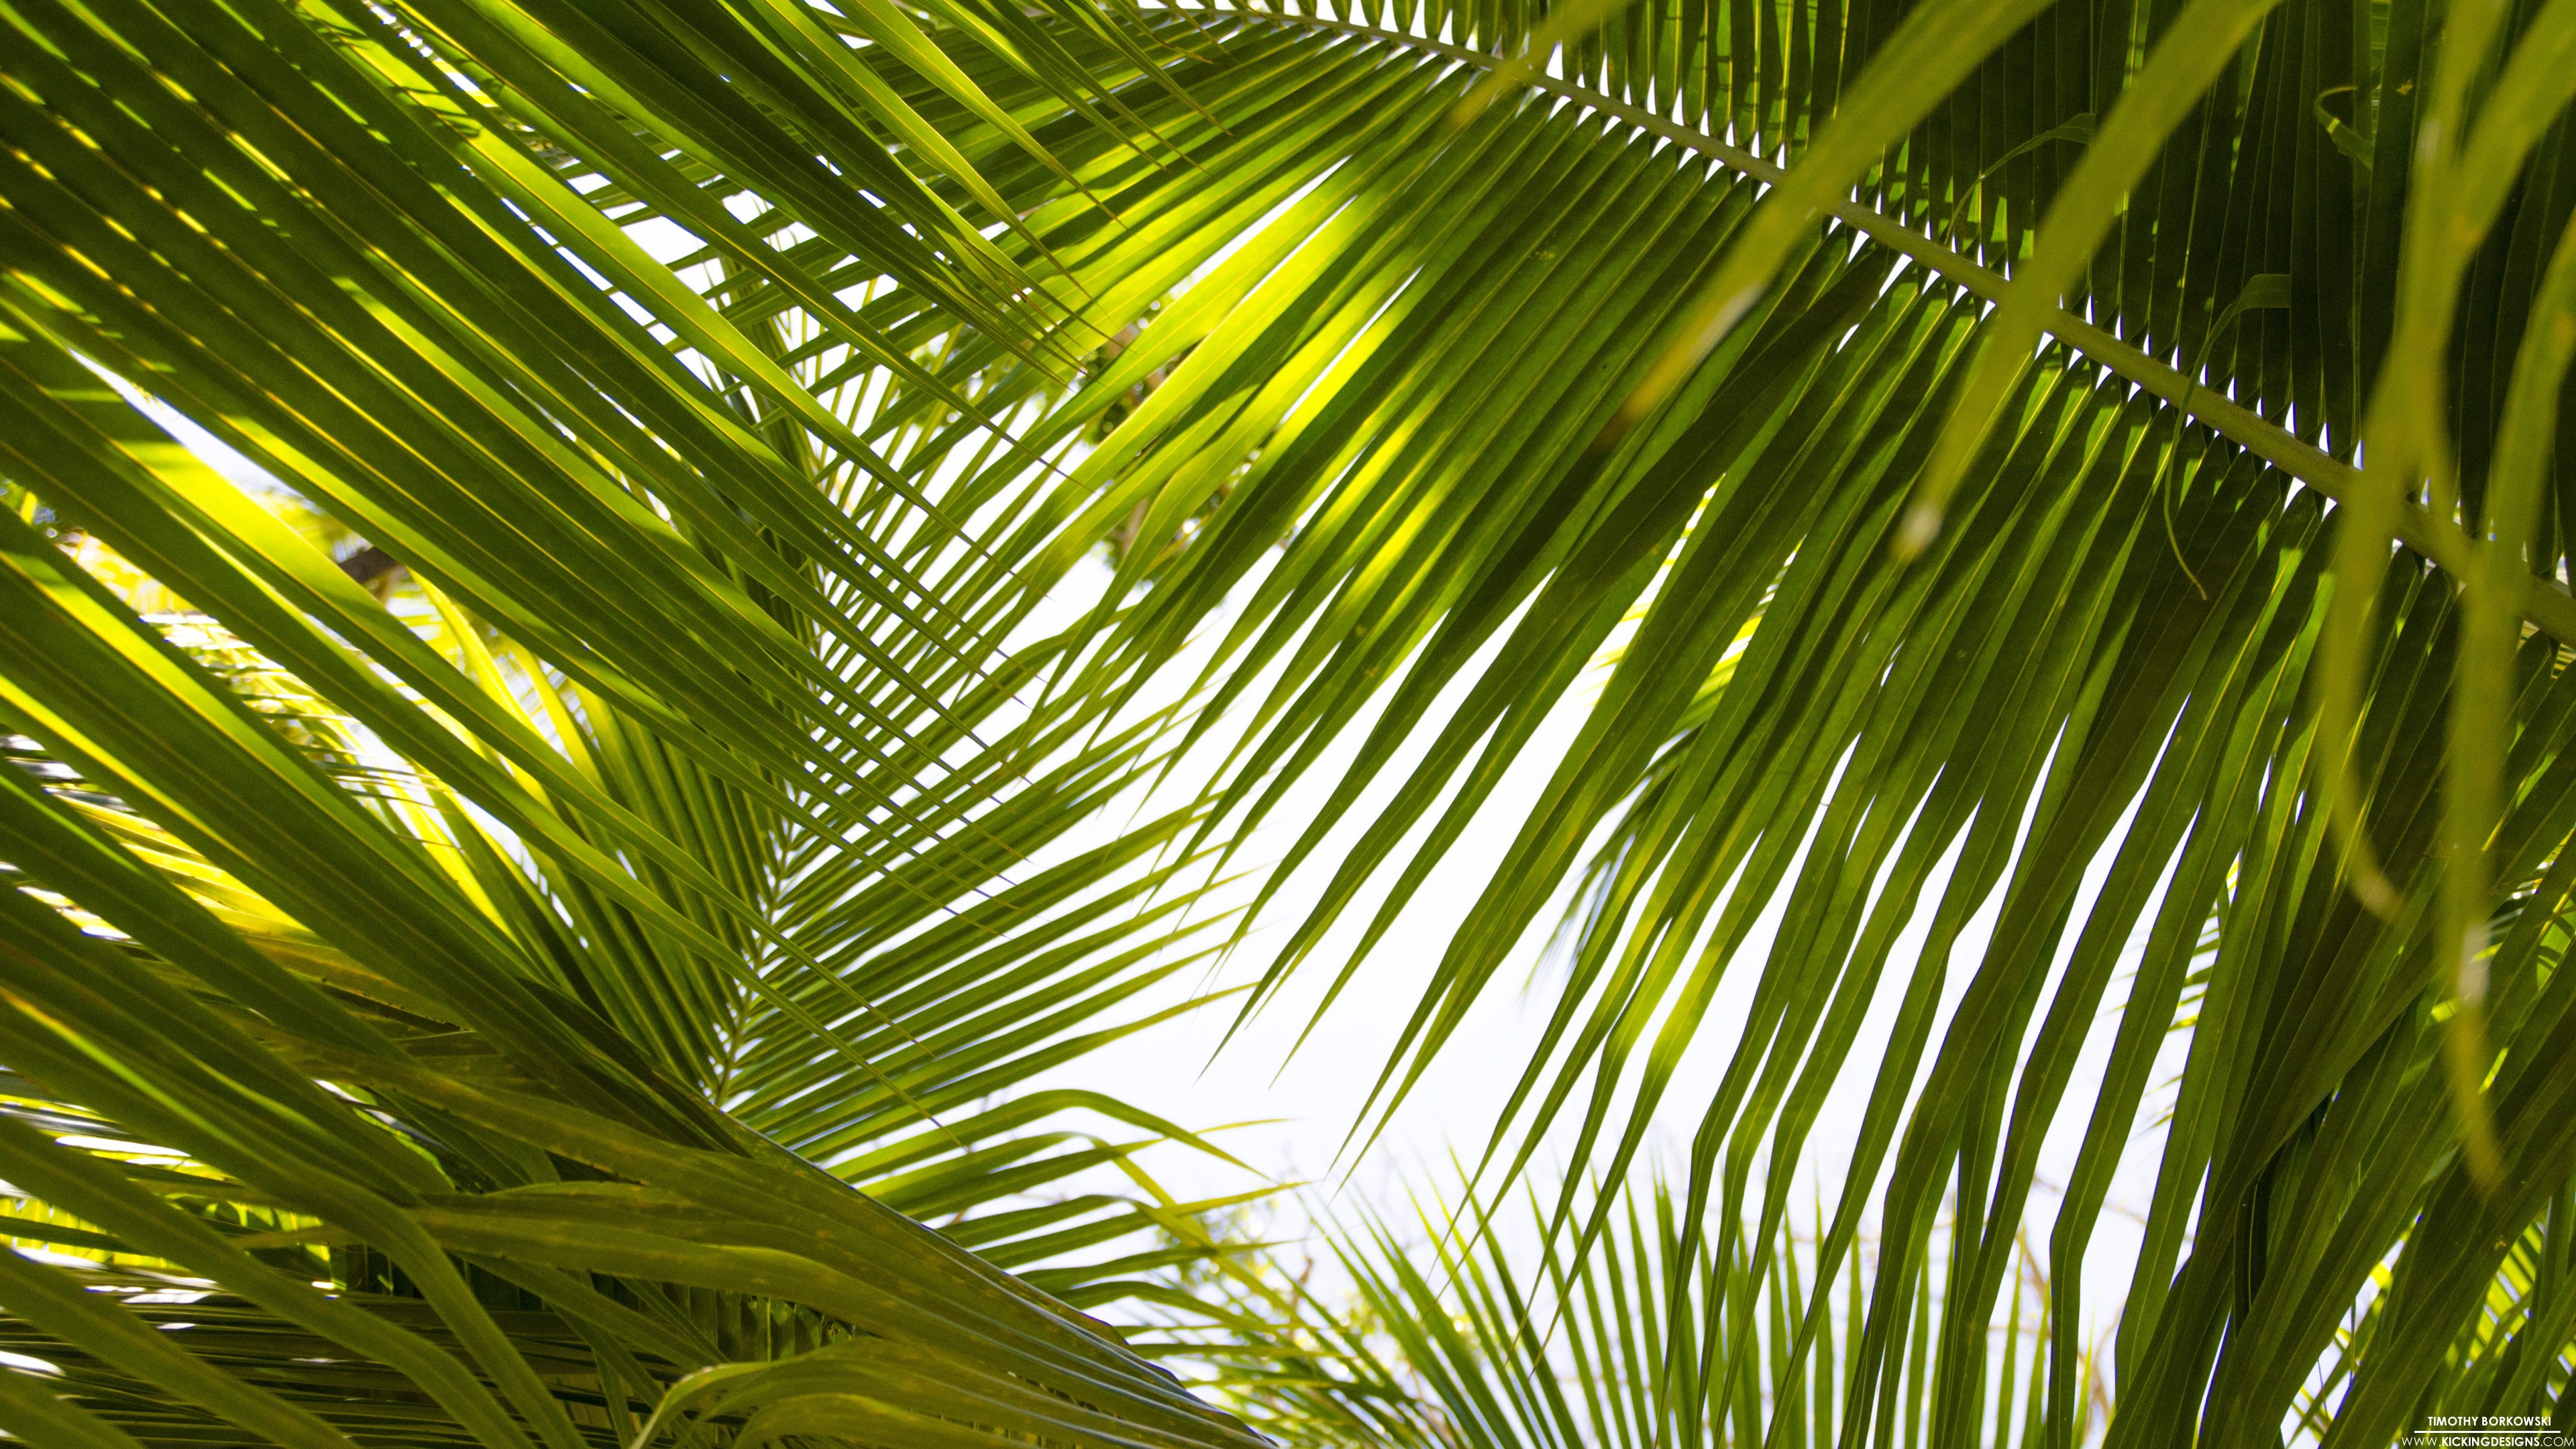 Tropical Leaves 9 17 2015 Wallpaper Background